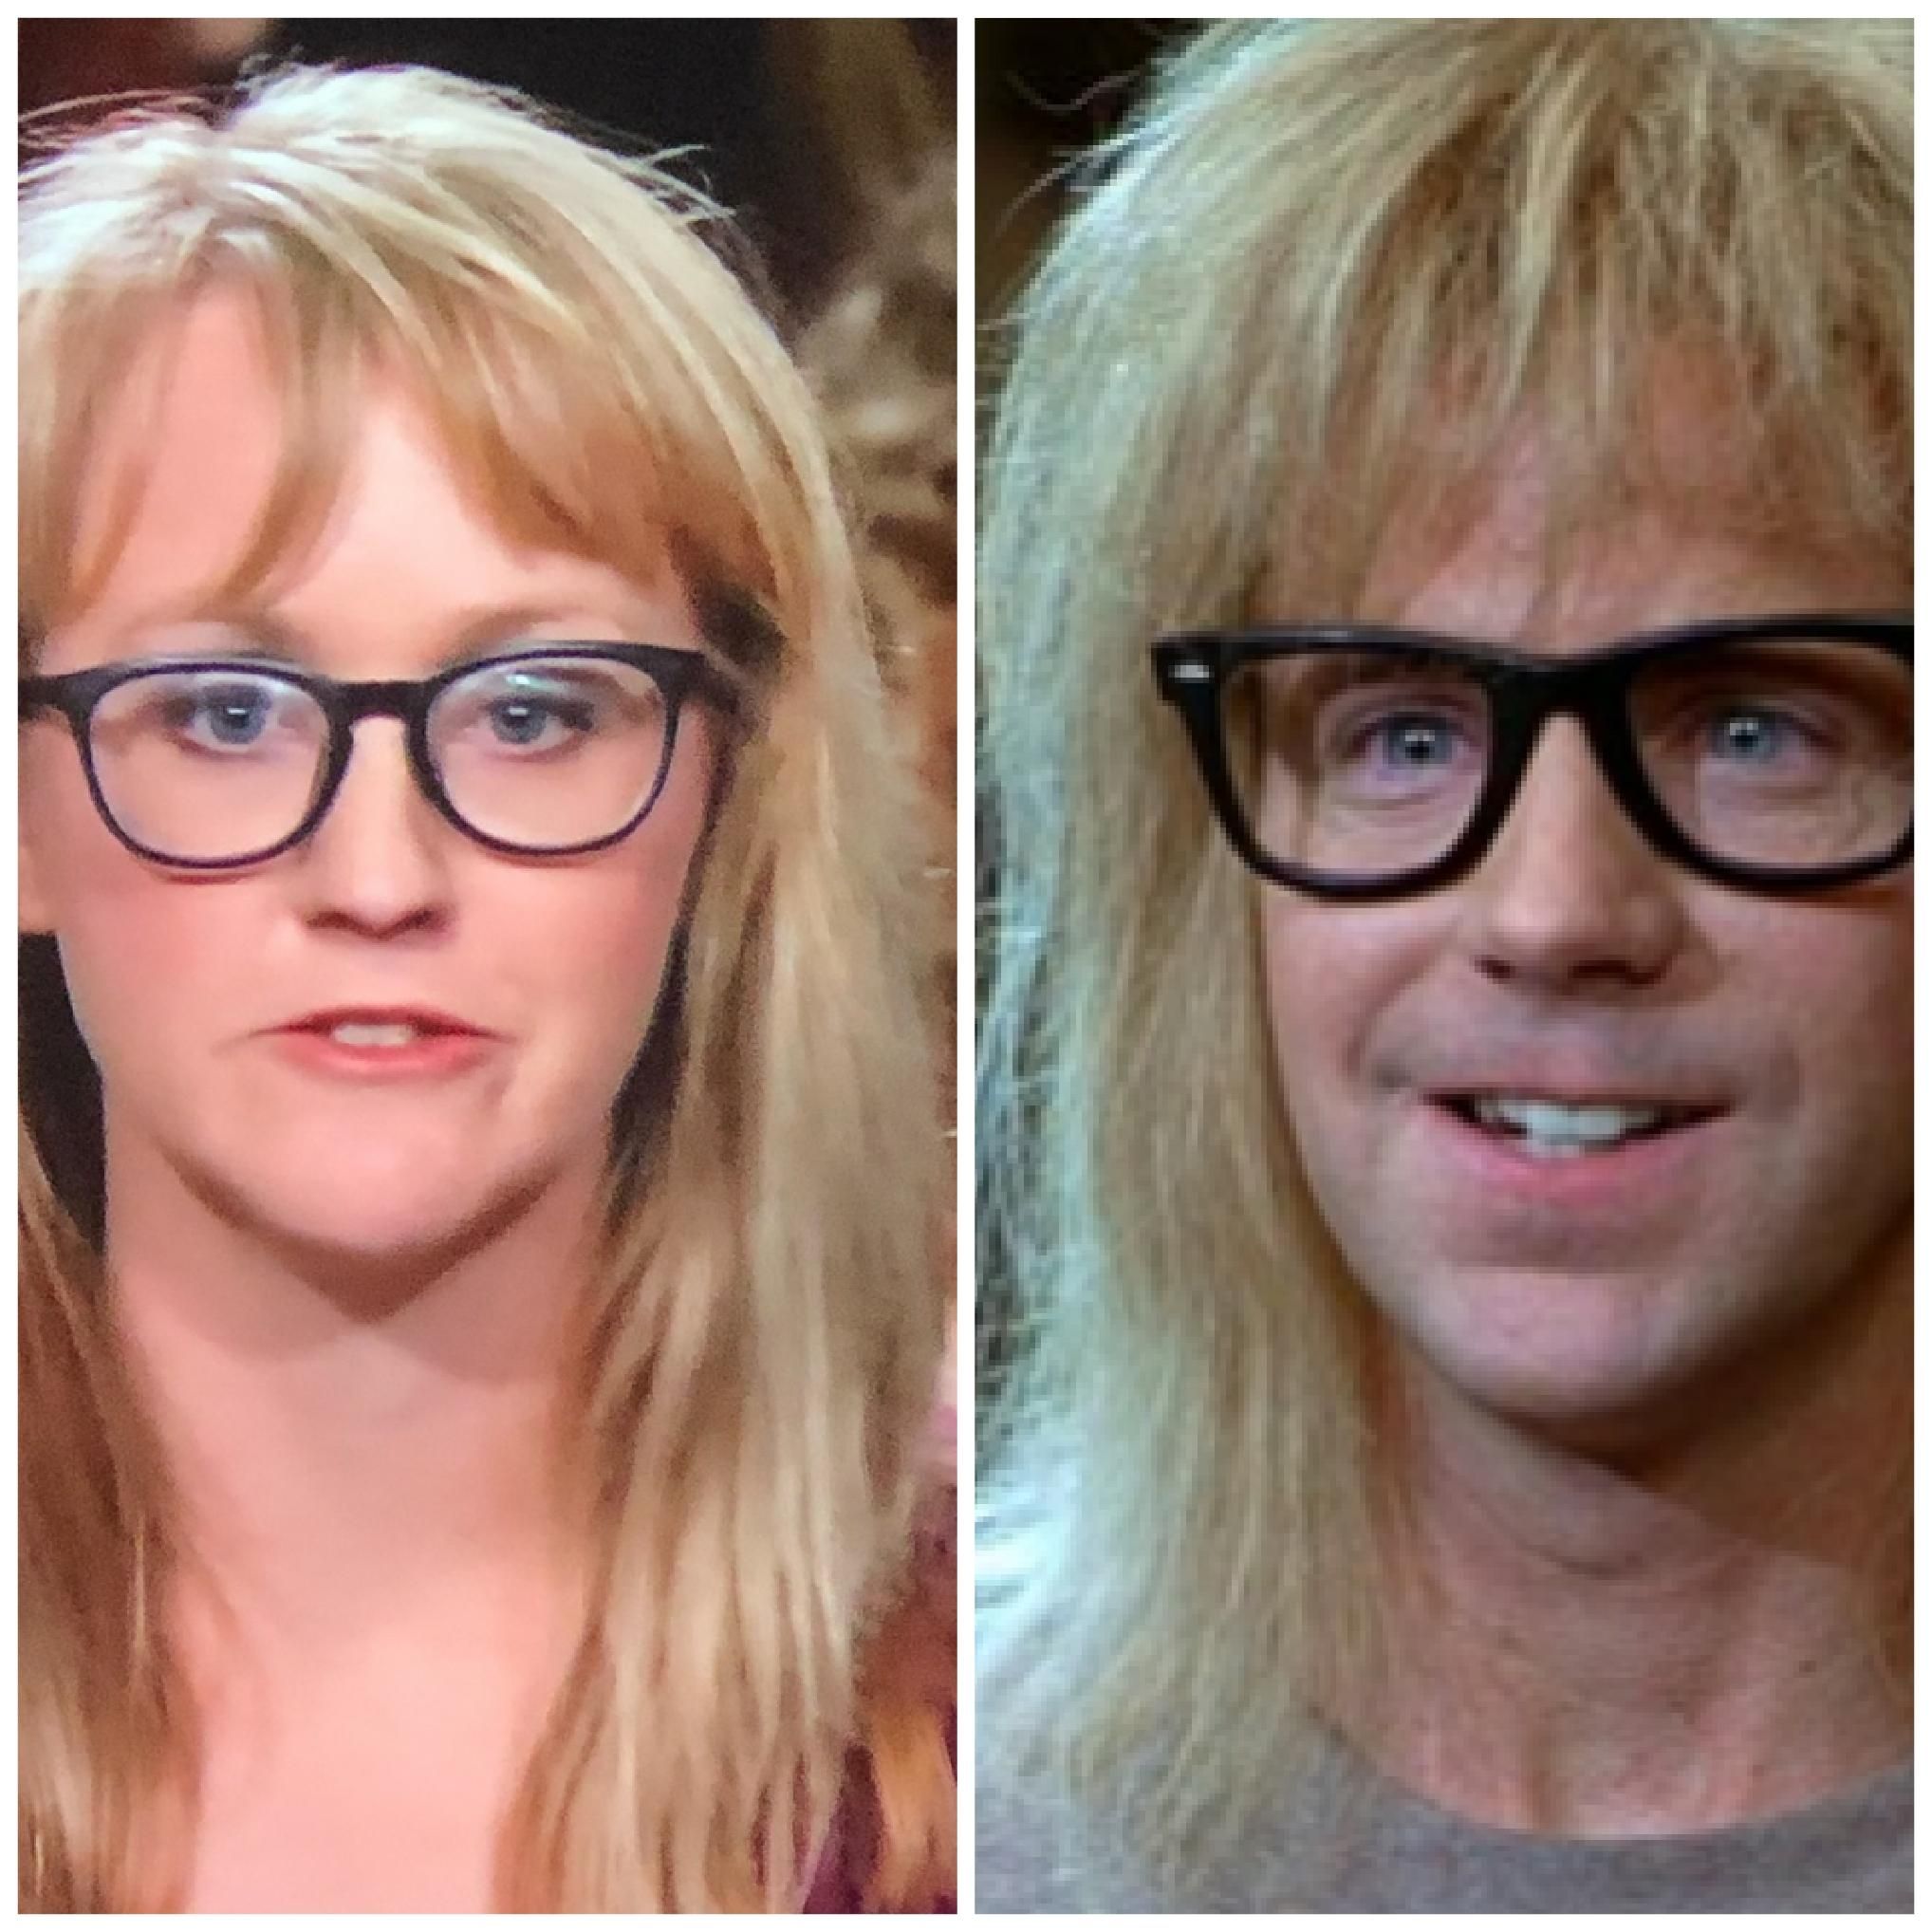 I saw this chick on Judge Judy who didn't know she was Garth from Wayne's World.